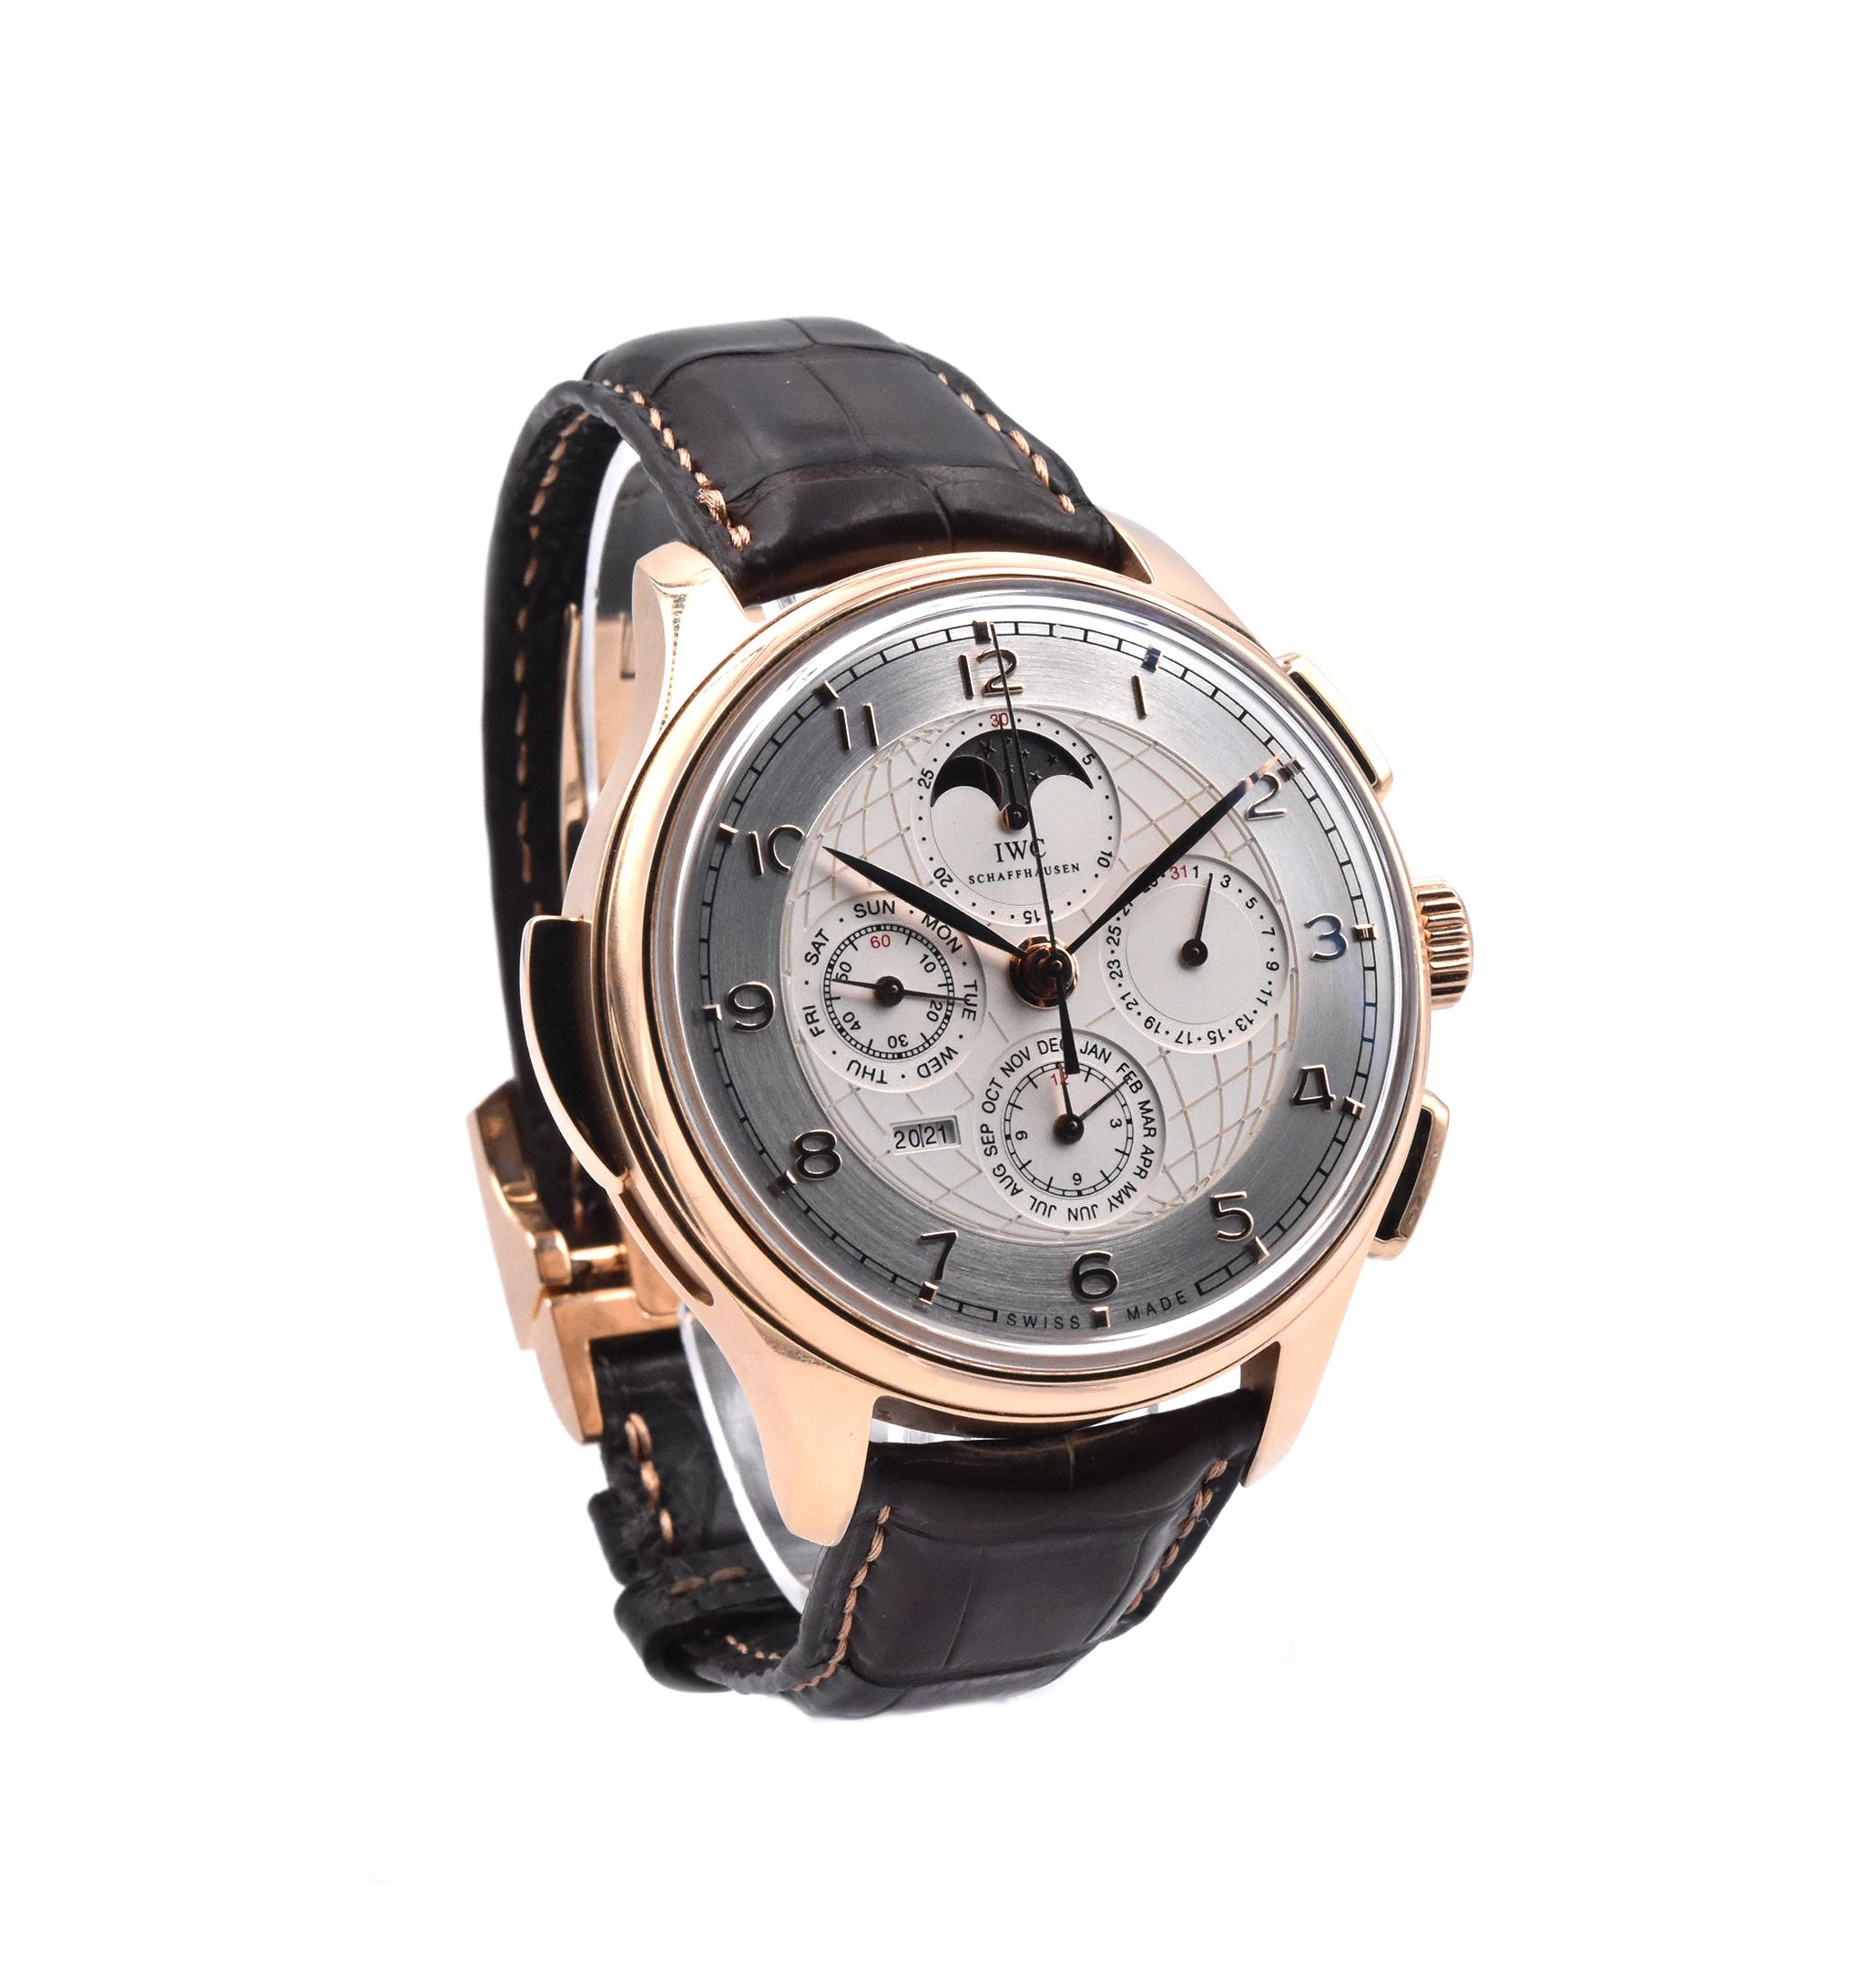 Designer: IWC
Movement: automatic
Function: Minute repeater for hours, quarters and minutes, Perpetual calendar with displays for the date, day, month, year in four digits and perpetual moon phase, Chronograph function with hours, minutes and